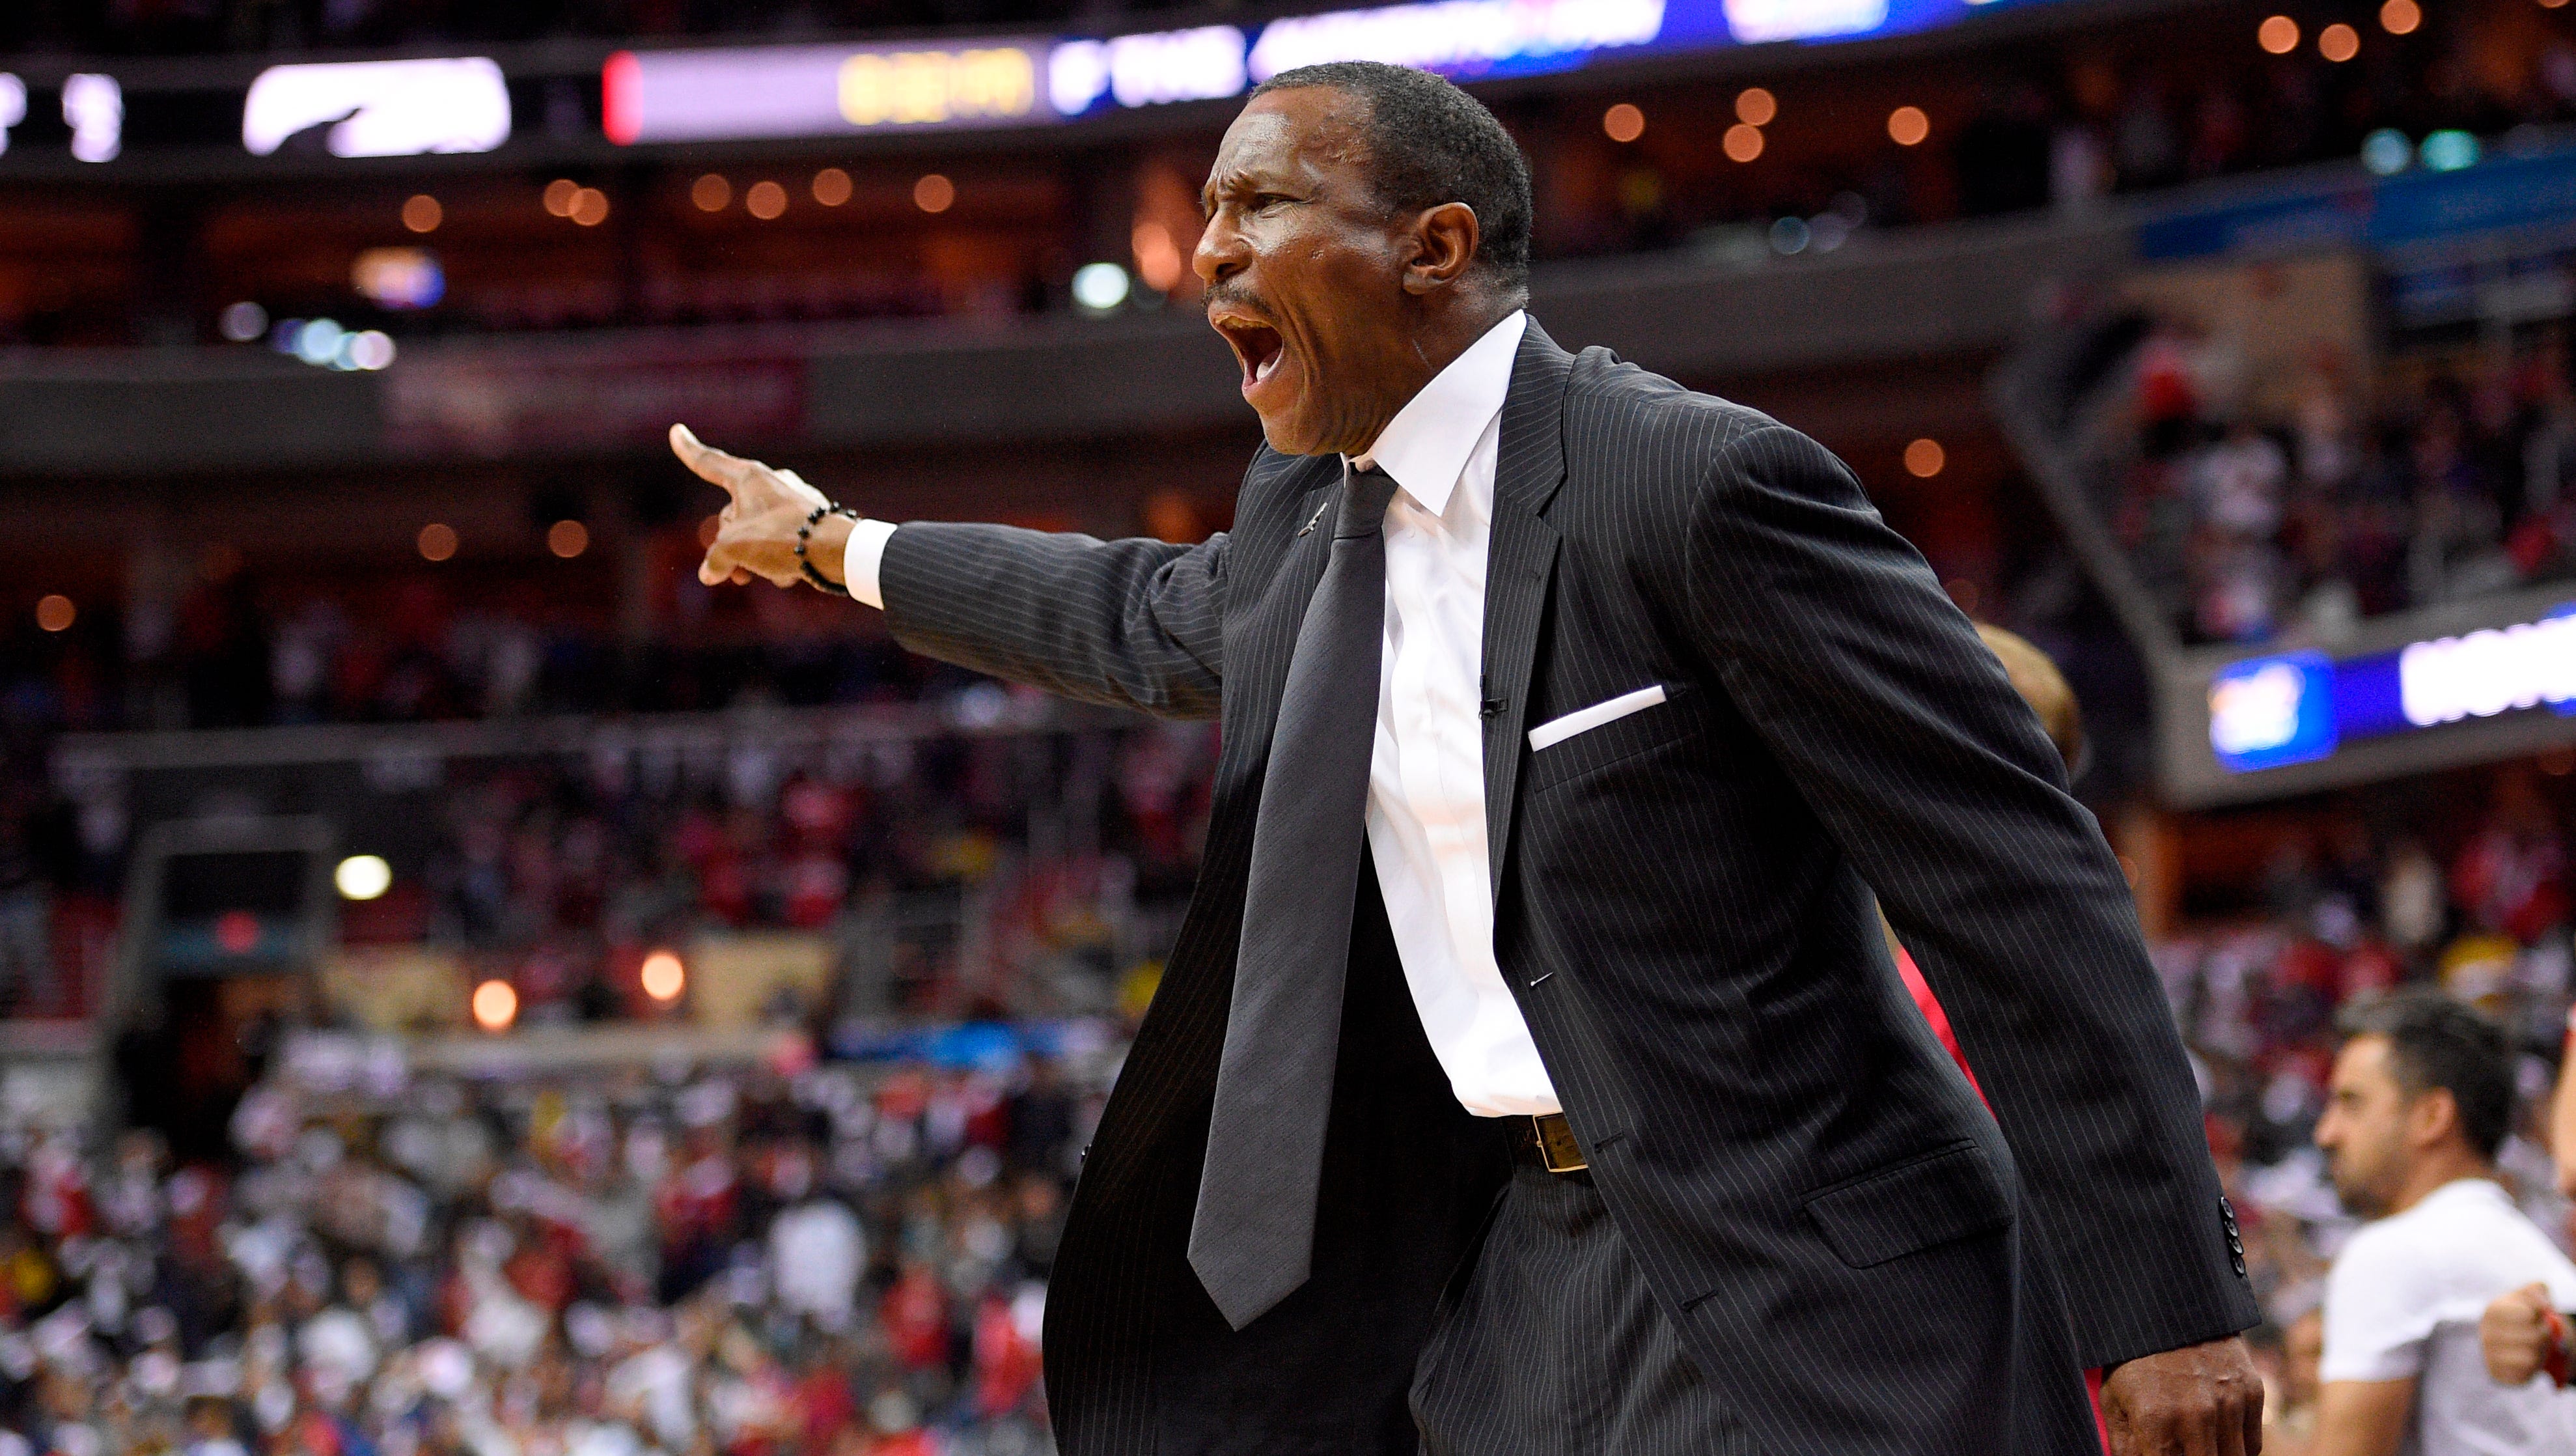 Toronto Raptors head coach Dwane Casey reacts during the second half of Game 4 of an NBA basketball first-round playoff series against the Washington Wizards, Sunday, April 22, 2018, in Washington. The Wizards won 106-98.